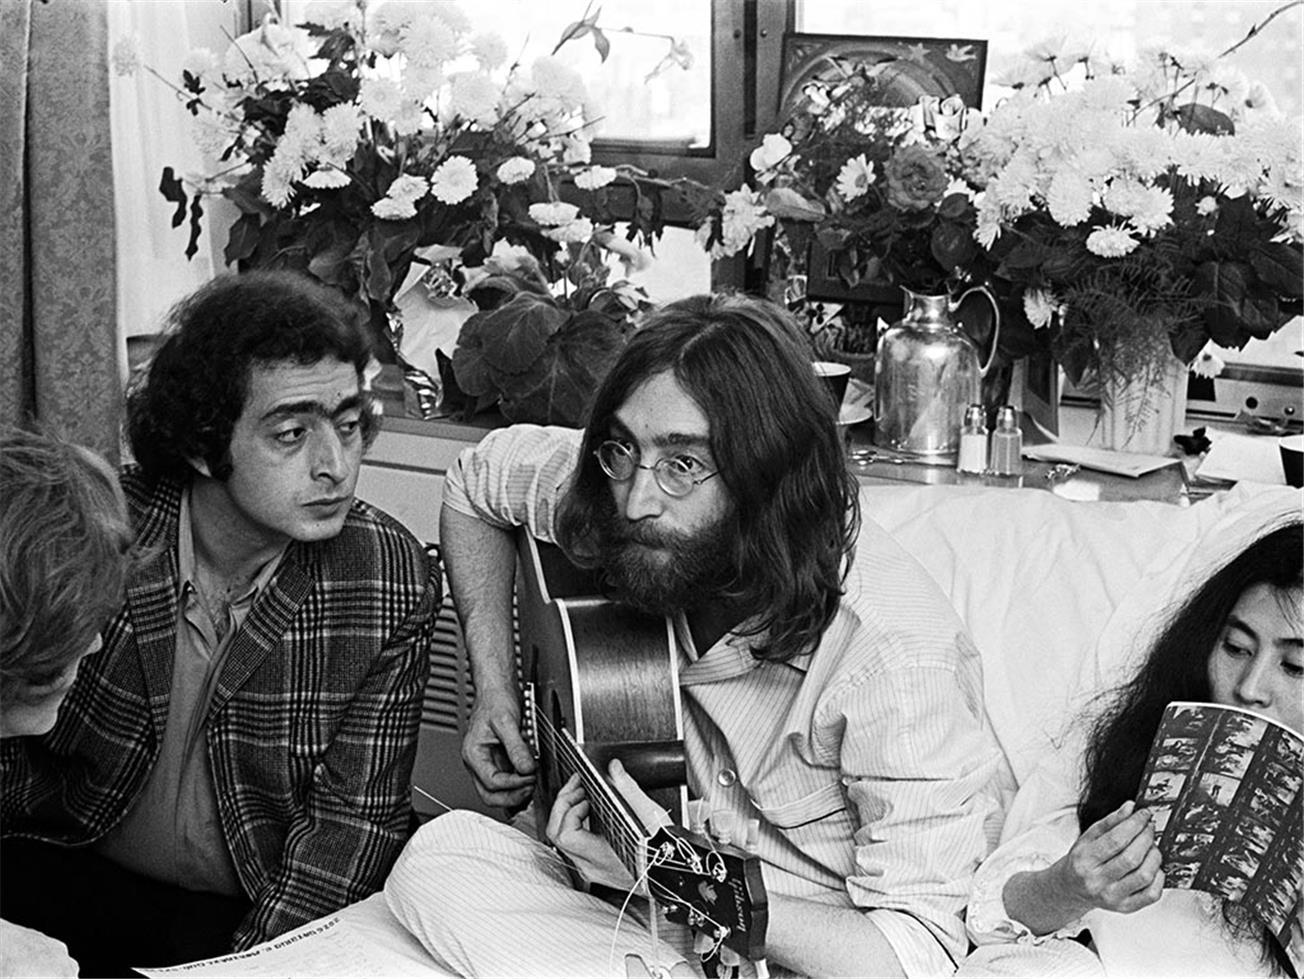 Stephen Sammons Black and White Photograph - John Lennon, Yoko Ono, Bed-In For Peace, Montreal, Canada 1969